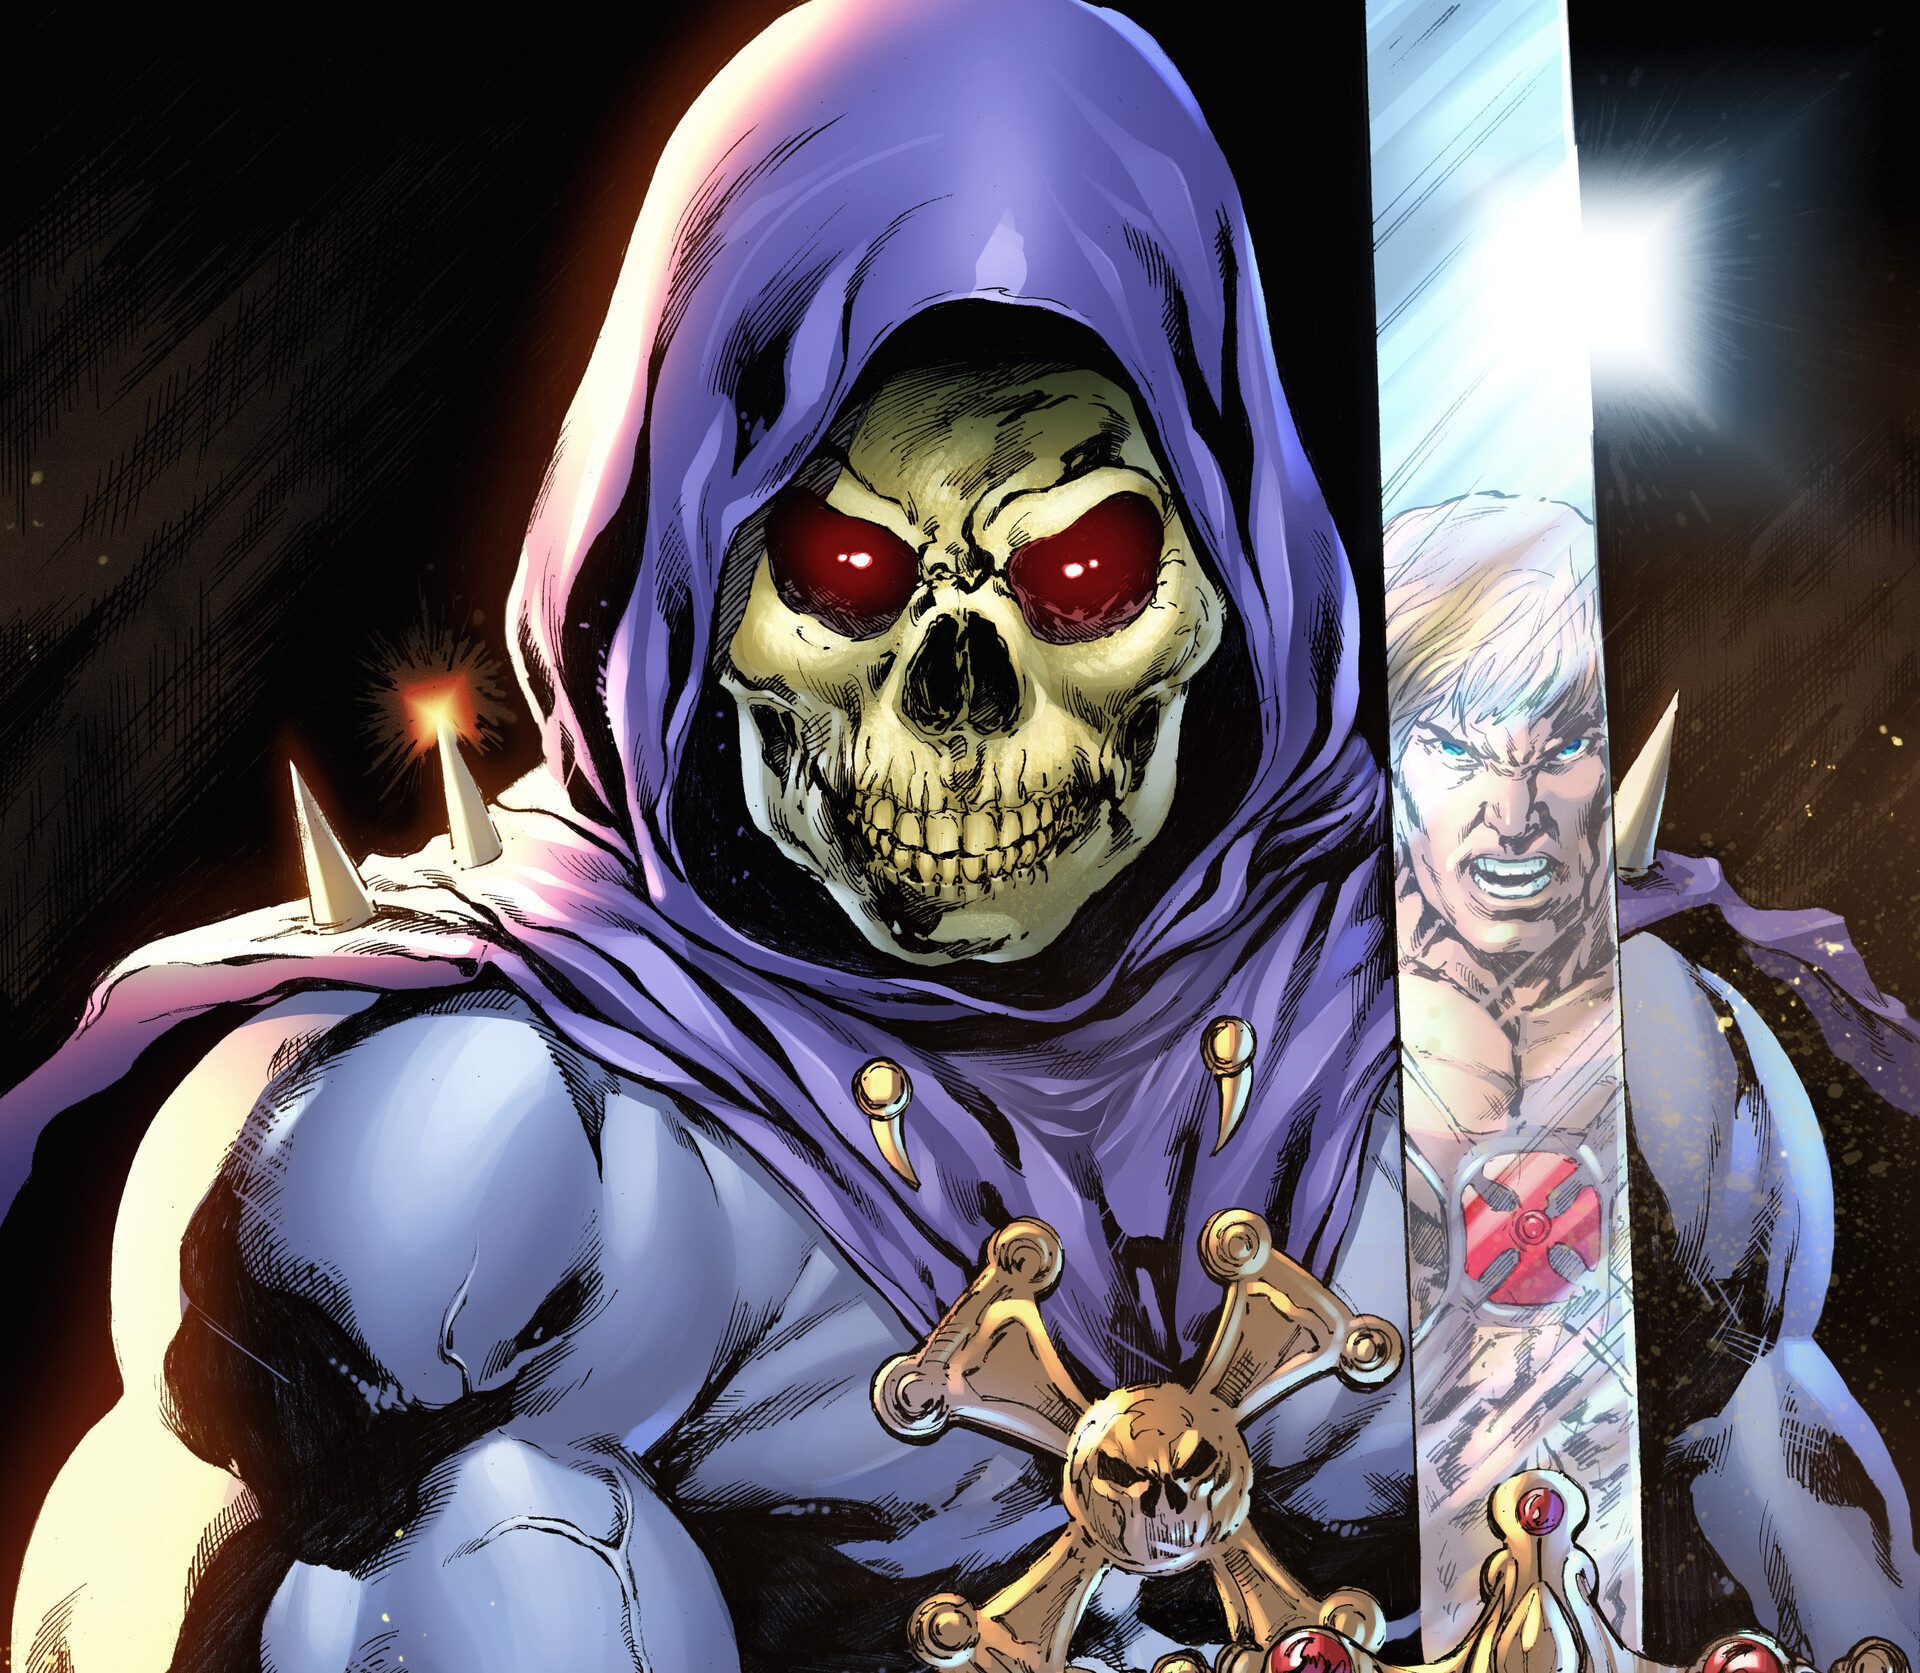 General 1920x1673 Skeletor fantasy art He-Man and the Masters of the Universe skull red eyes sword reflection He-Man